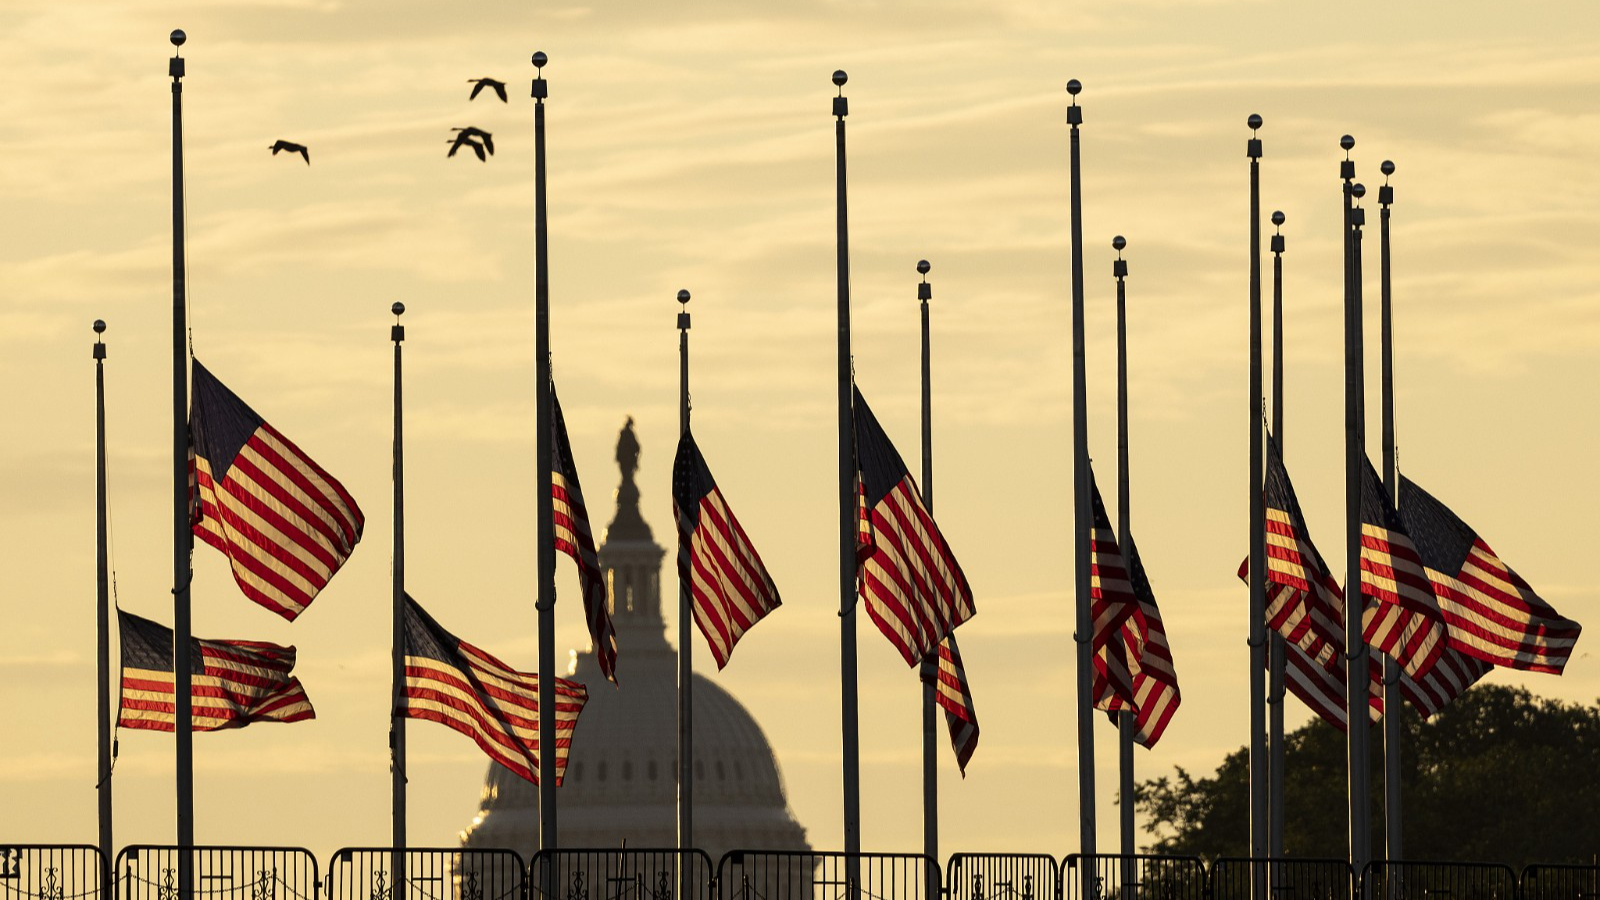 American flags fly at half-staff in response to the San Jose mass shooting at the base of the Washington Monument on the National Mall in Washington, D.C., U.S., May 27, 2021. /CFP